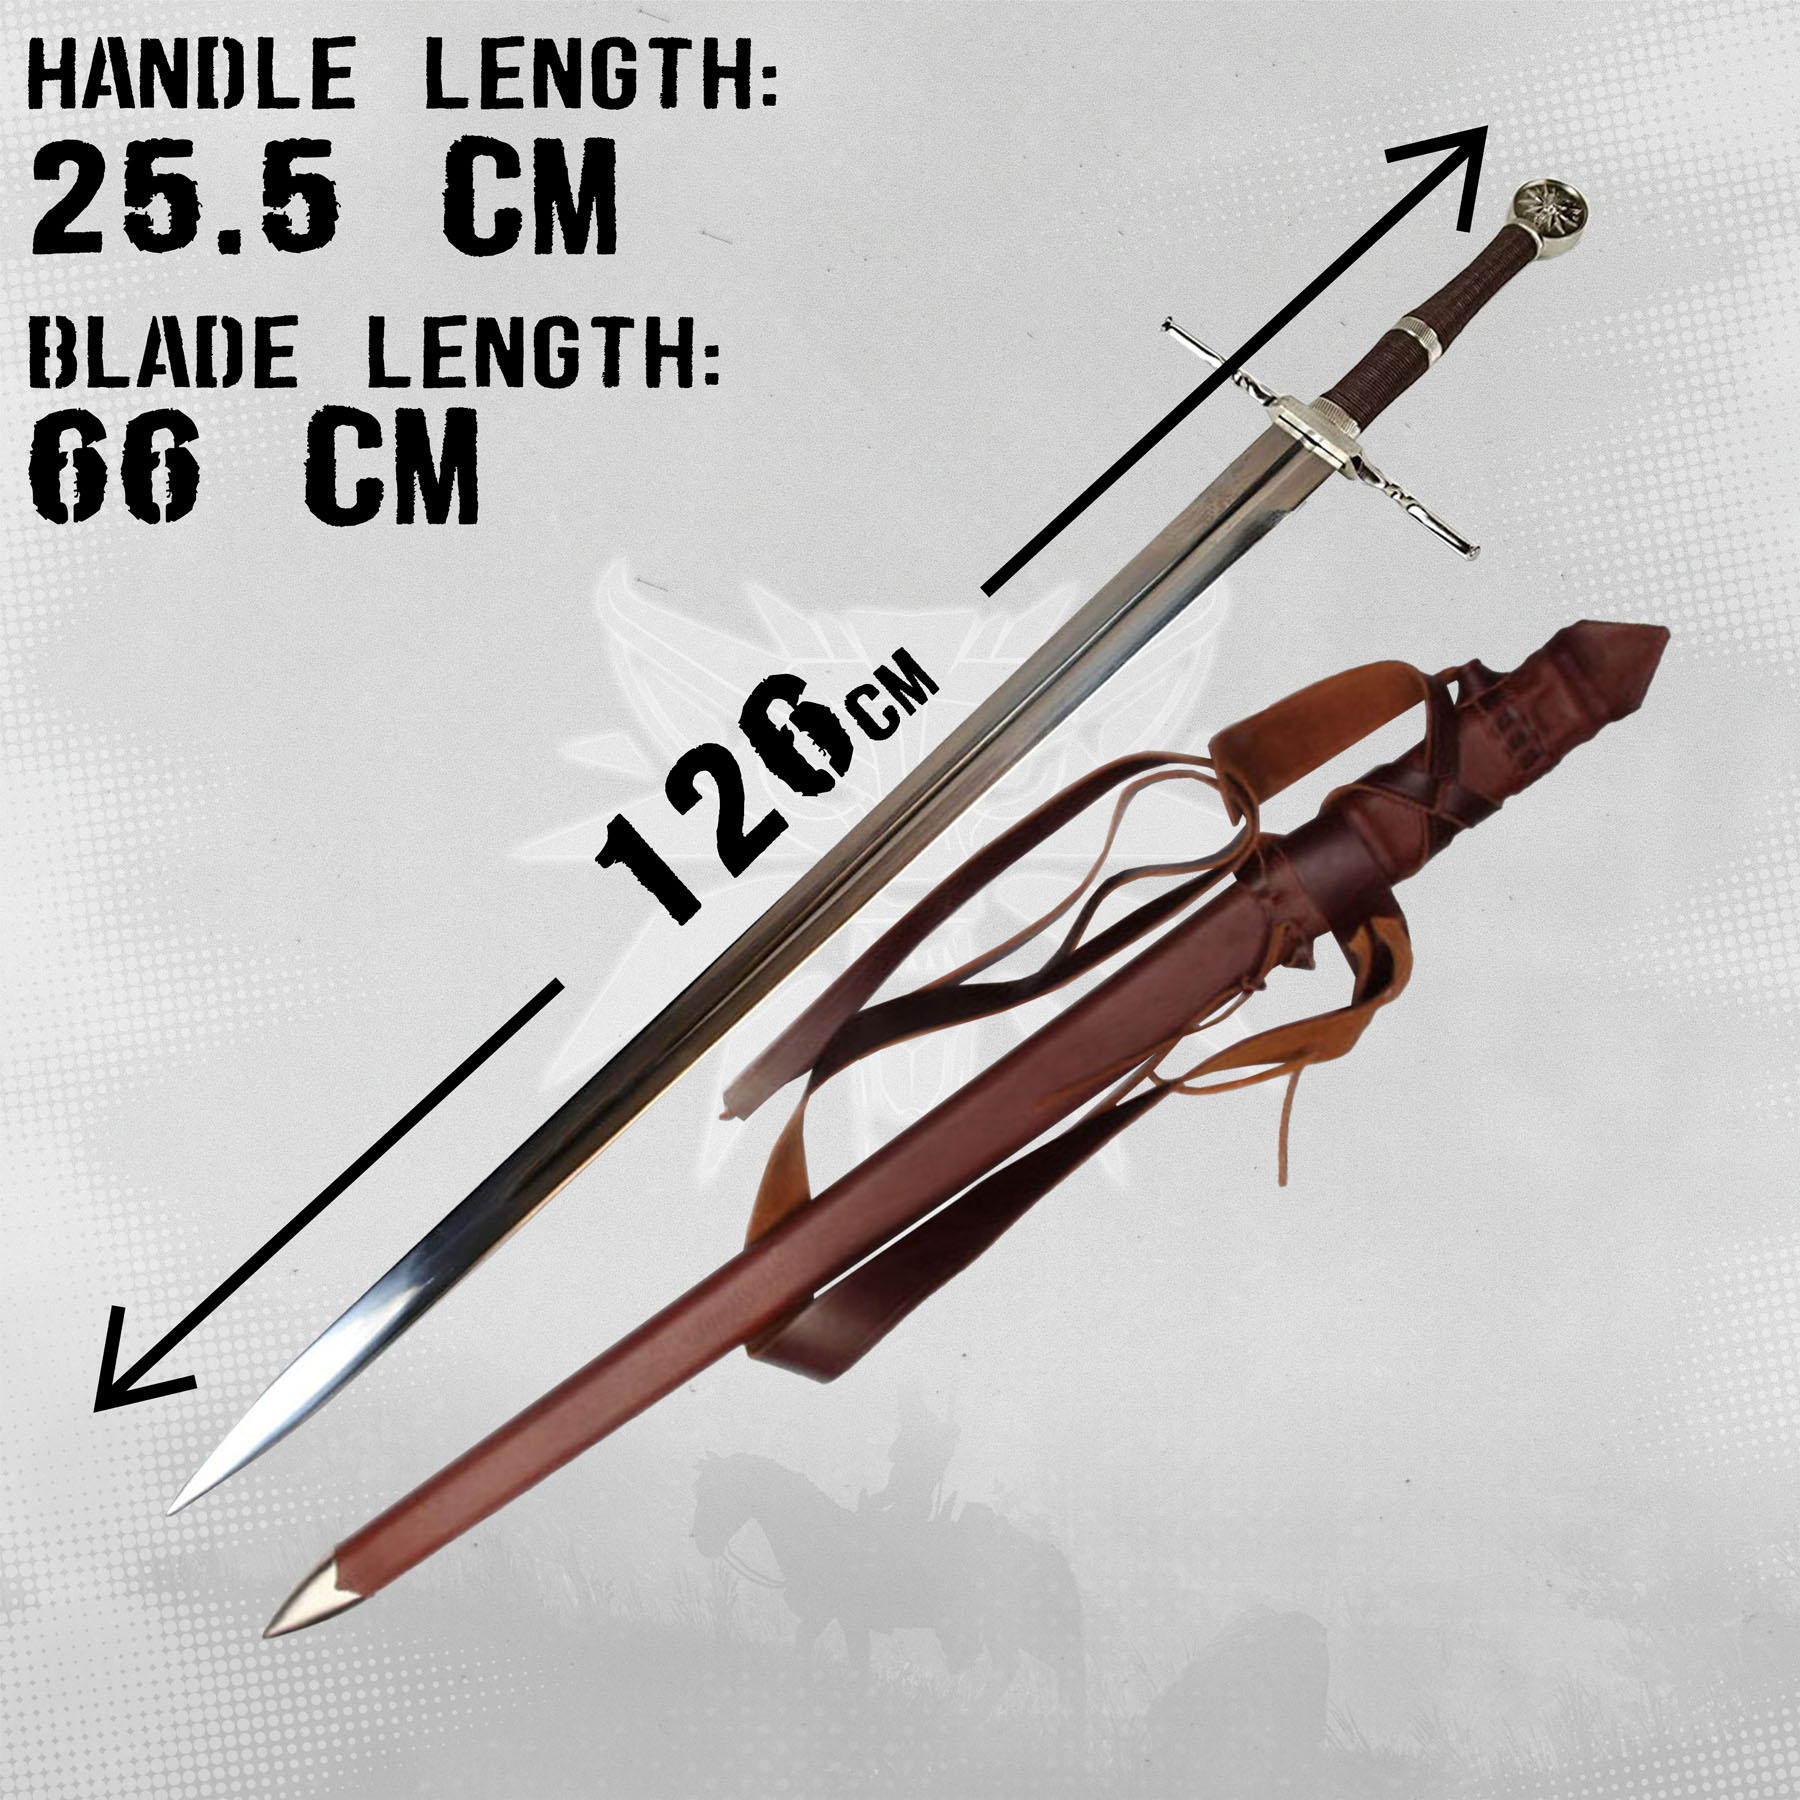 Witcher Steel Sword handforged with belt and scabbard - ltd Edition 500